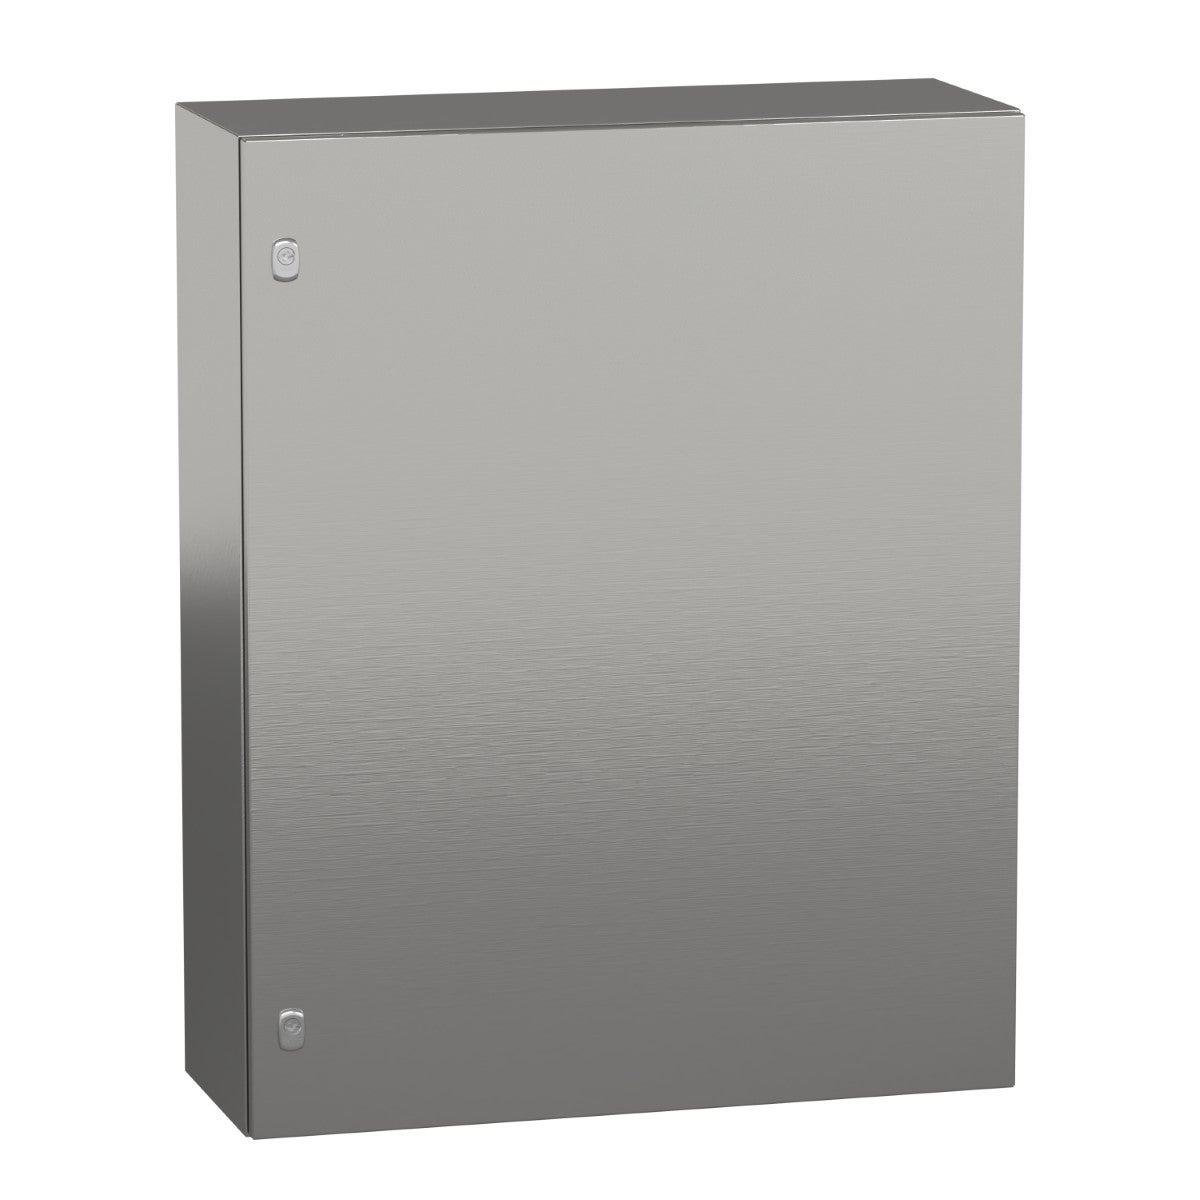 Wall mounted enclosure, Spacial S3X, stainless steel 304L, plain door, 1000x800x300mm, IP66